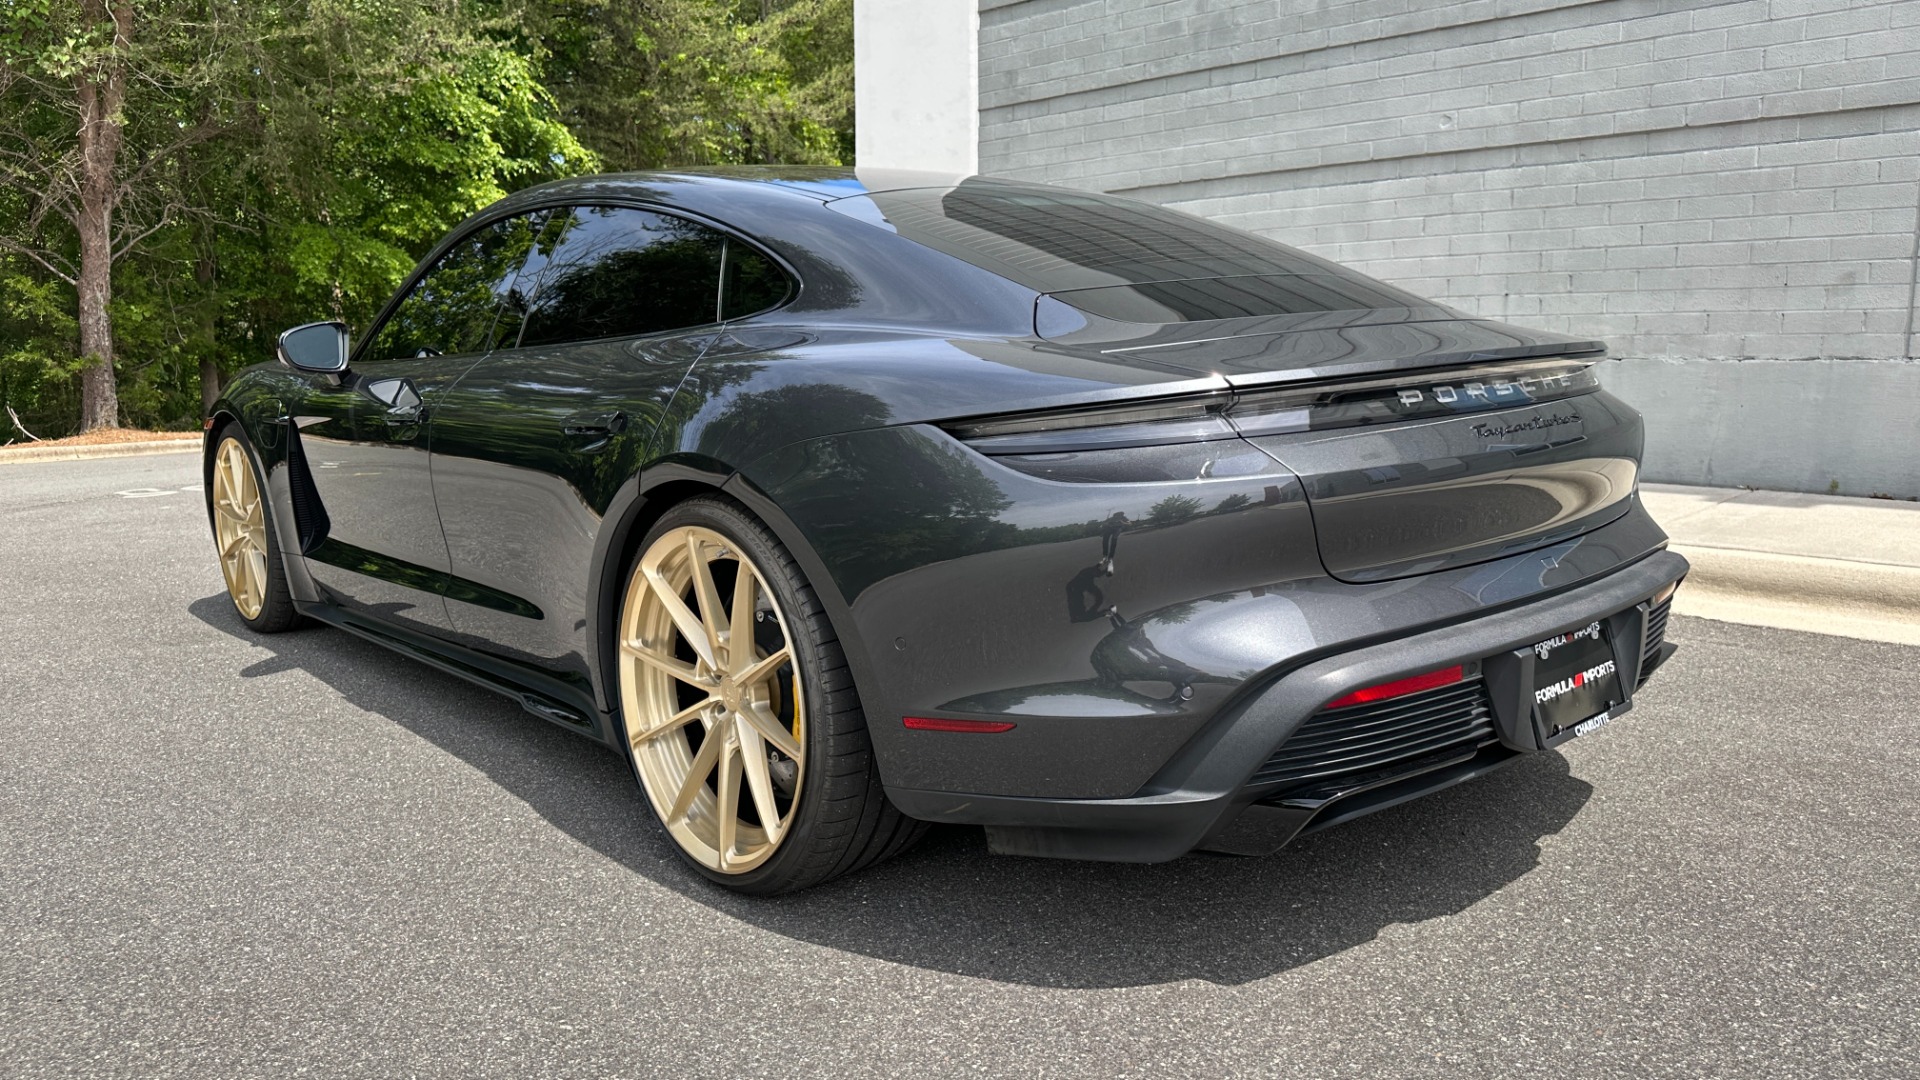 Used 2020 Porsche Taycan TURBO S / ANRKY WHEELS / BURMESTER / PDCC / INNODRIVE for sale $127,999 at Formula Imports in Charlotte NC 28227 7